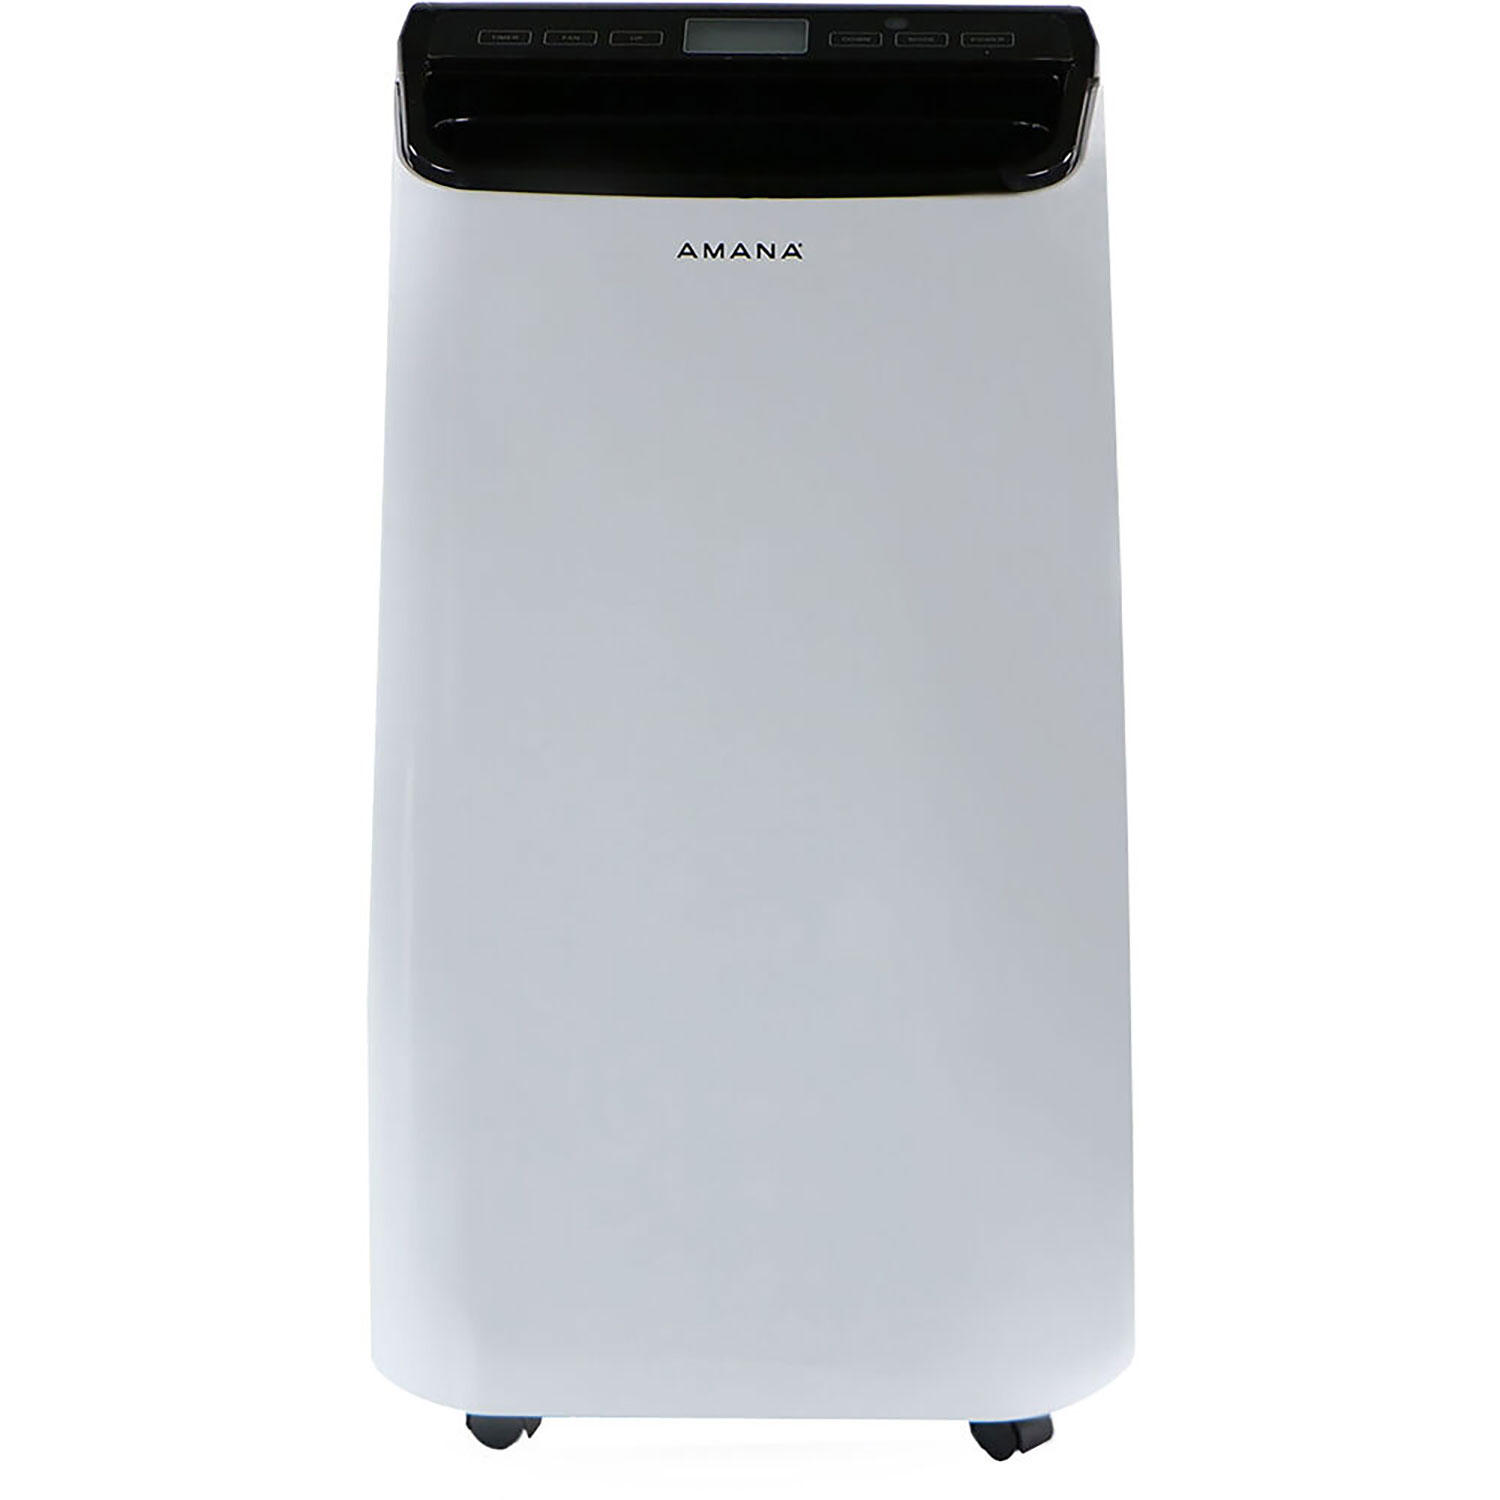 Amana Portable Air Conditioner with Remote Control in White/Black for Rooms up to 500-Sq. Ft.